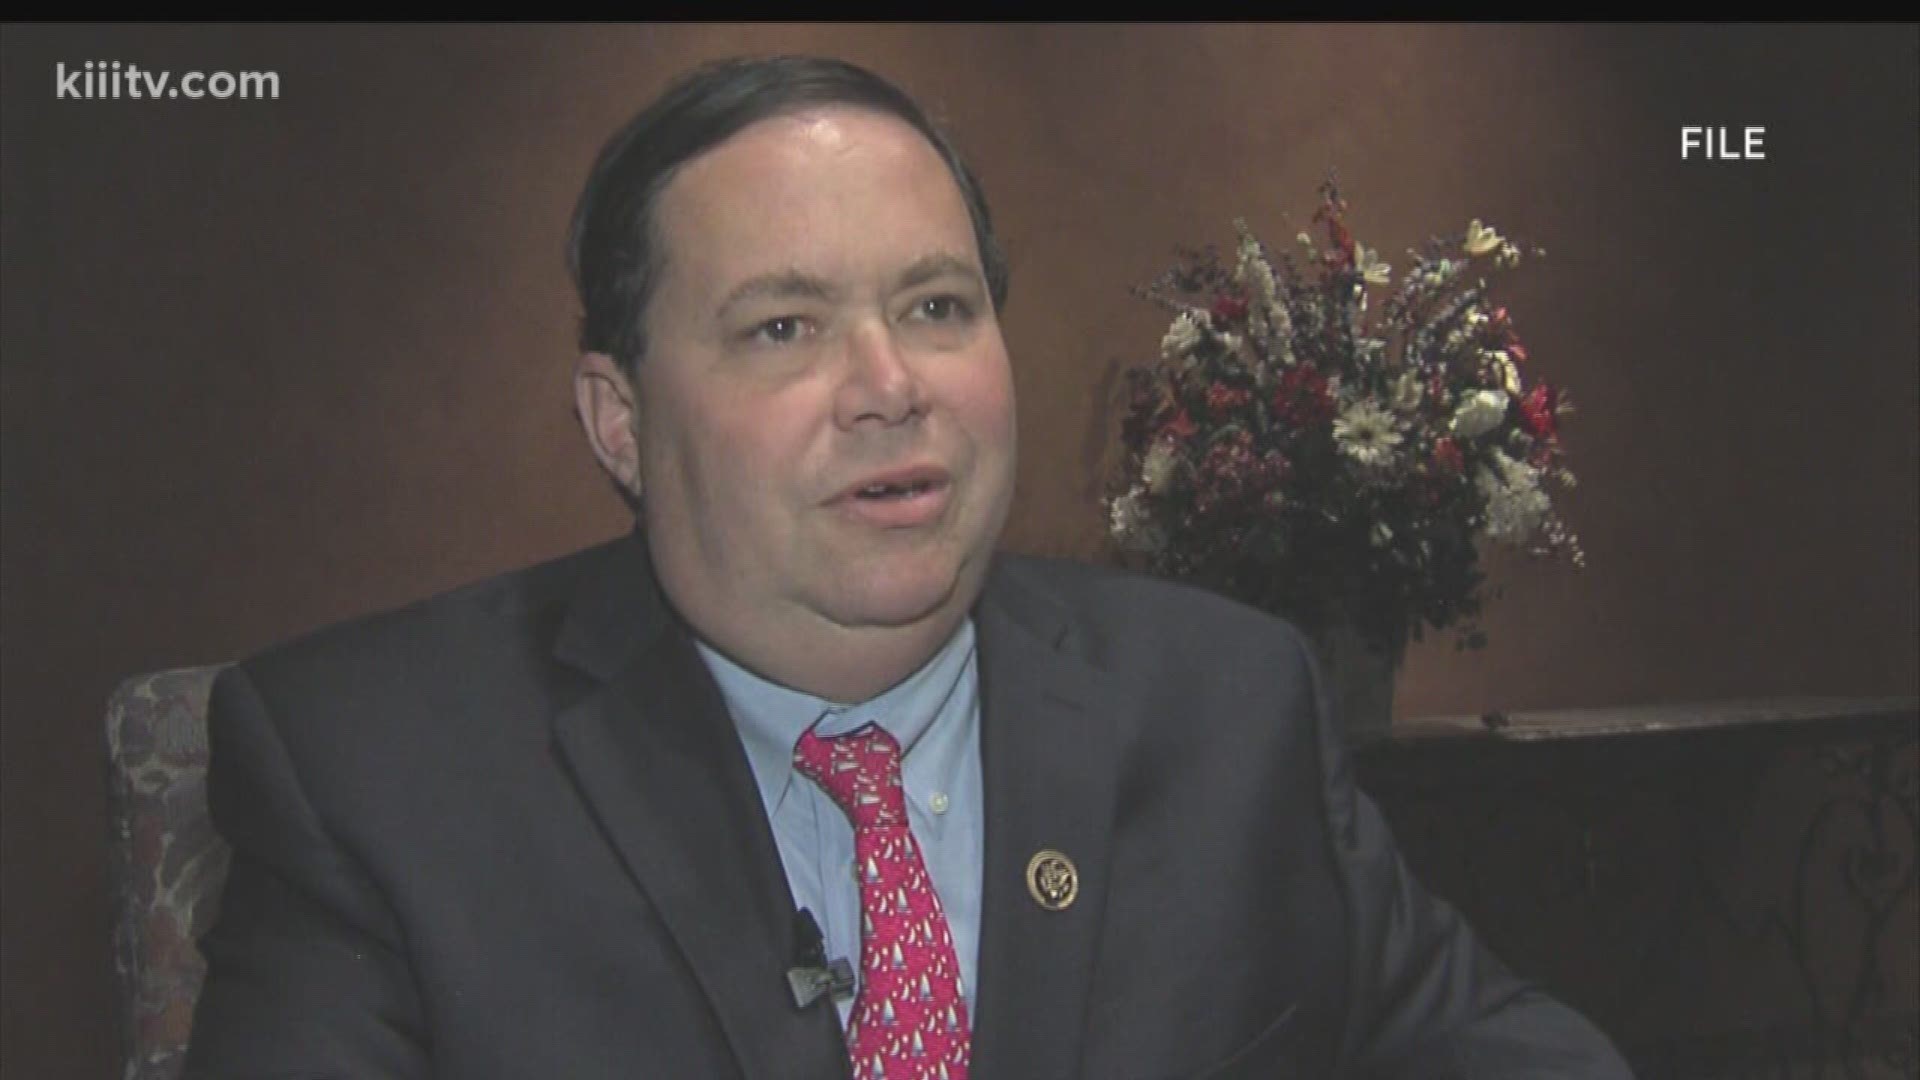 Congressional critics believe Farenthold was trying to avoid punishment that the commission could levy against him.